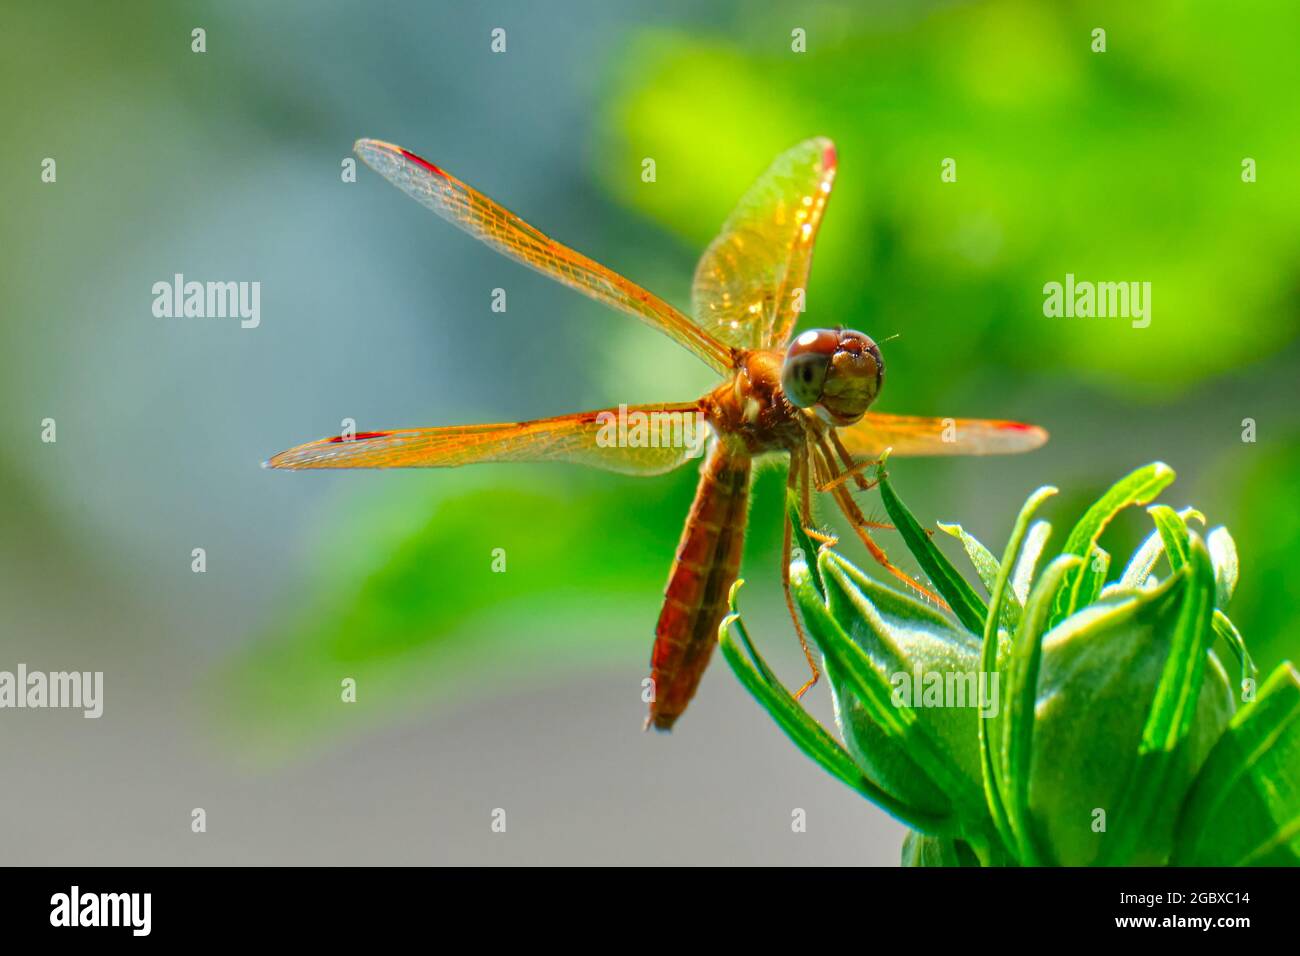 Eastern amberwing dragonfly (Perithemis tenera) perched on a flower bush Stock Photo